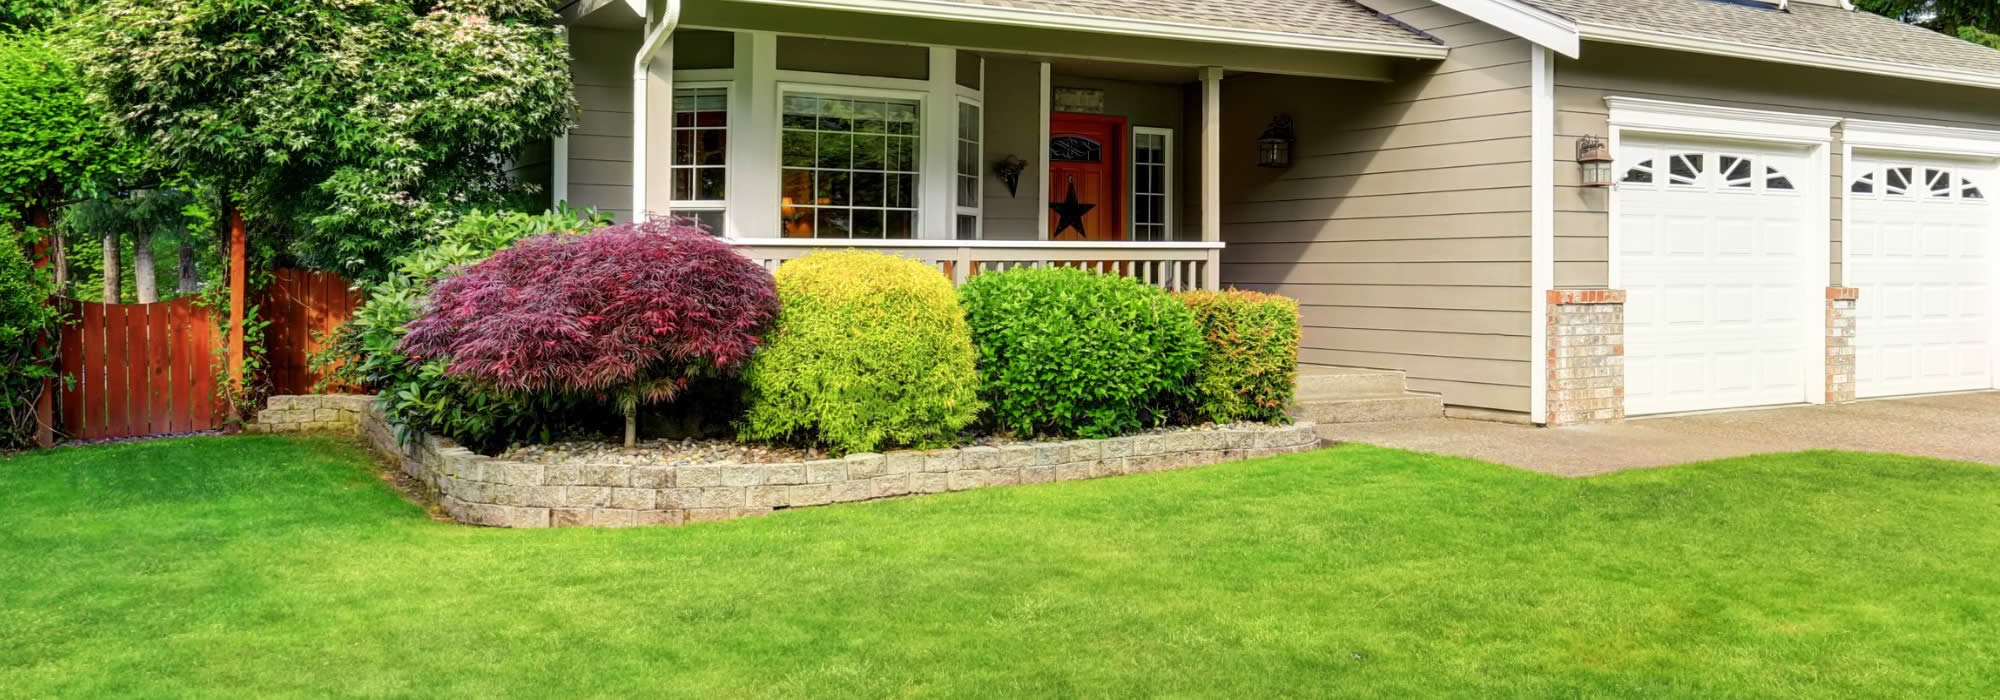 Landscaping Services in Cross Plains